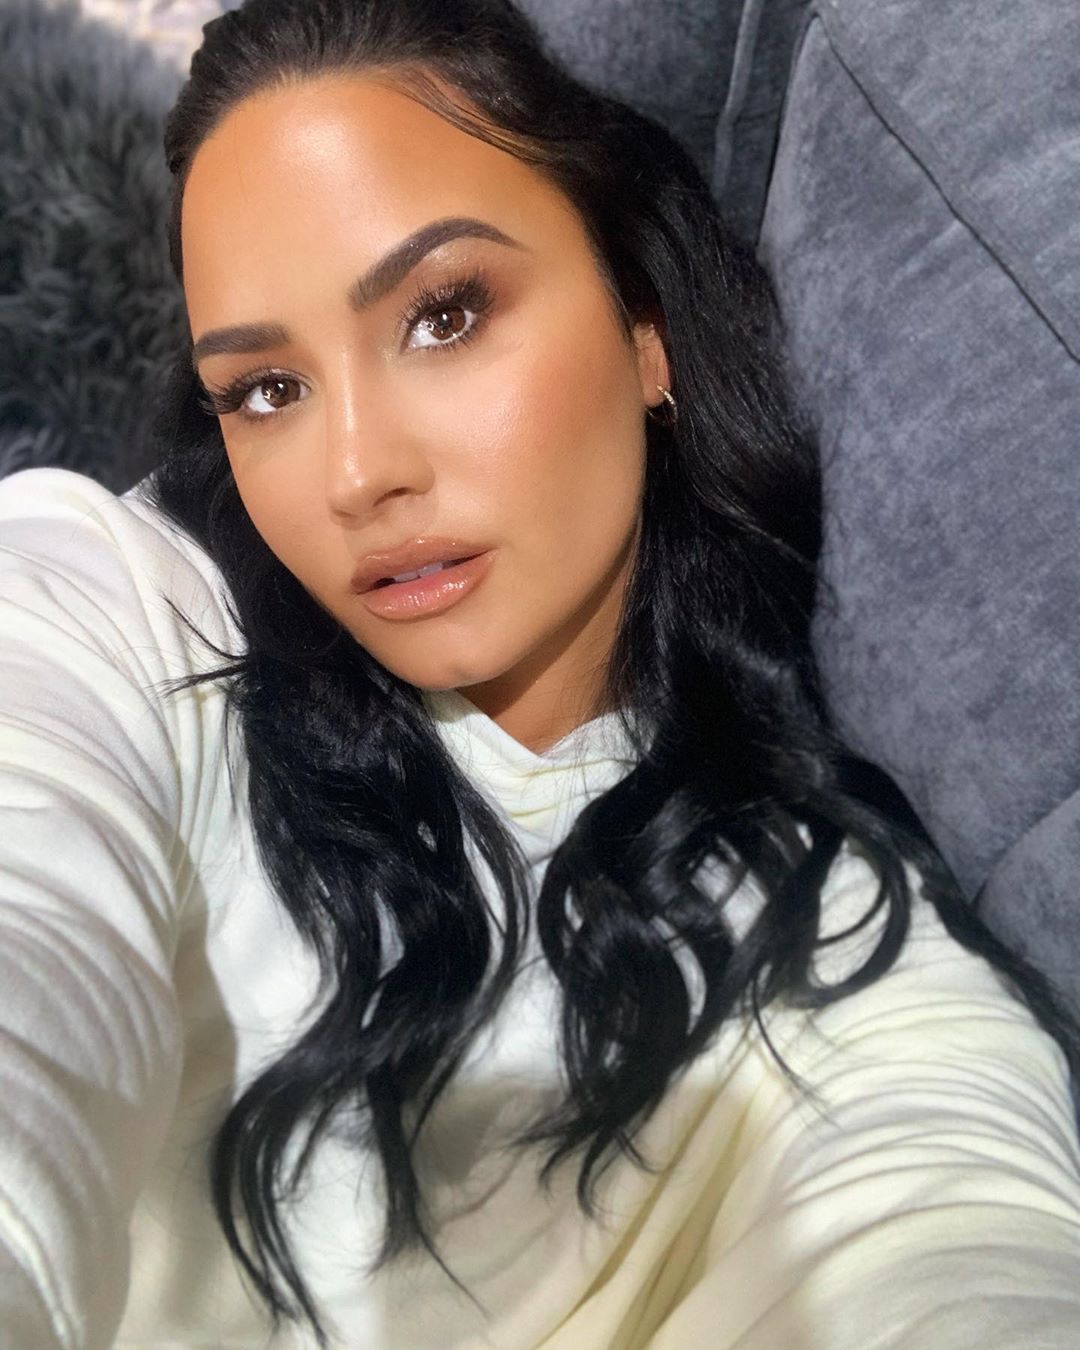 A public account of agony: How Demi Lovato made her suffering her